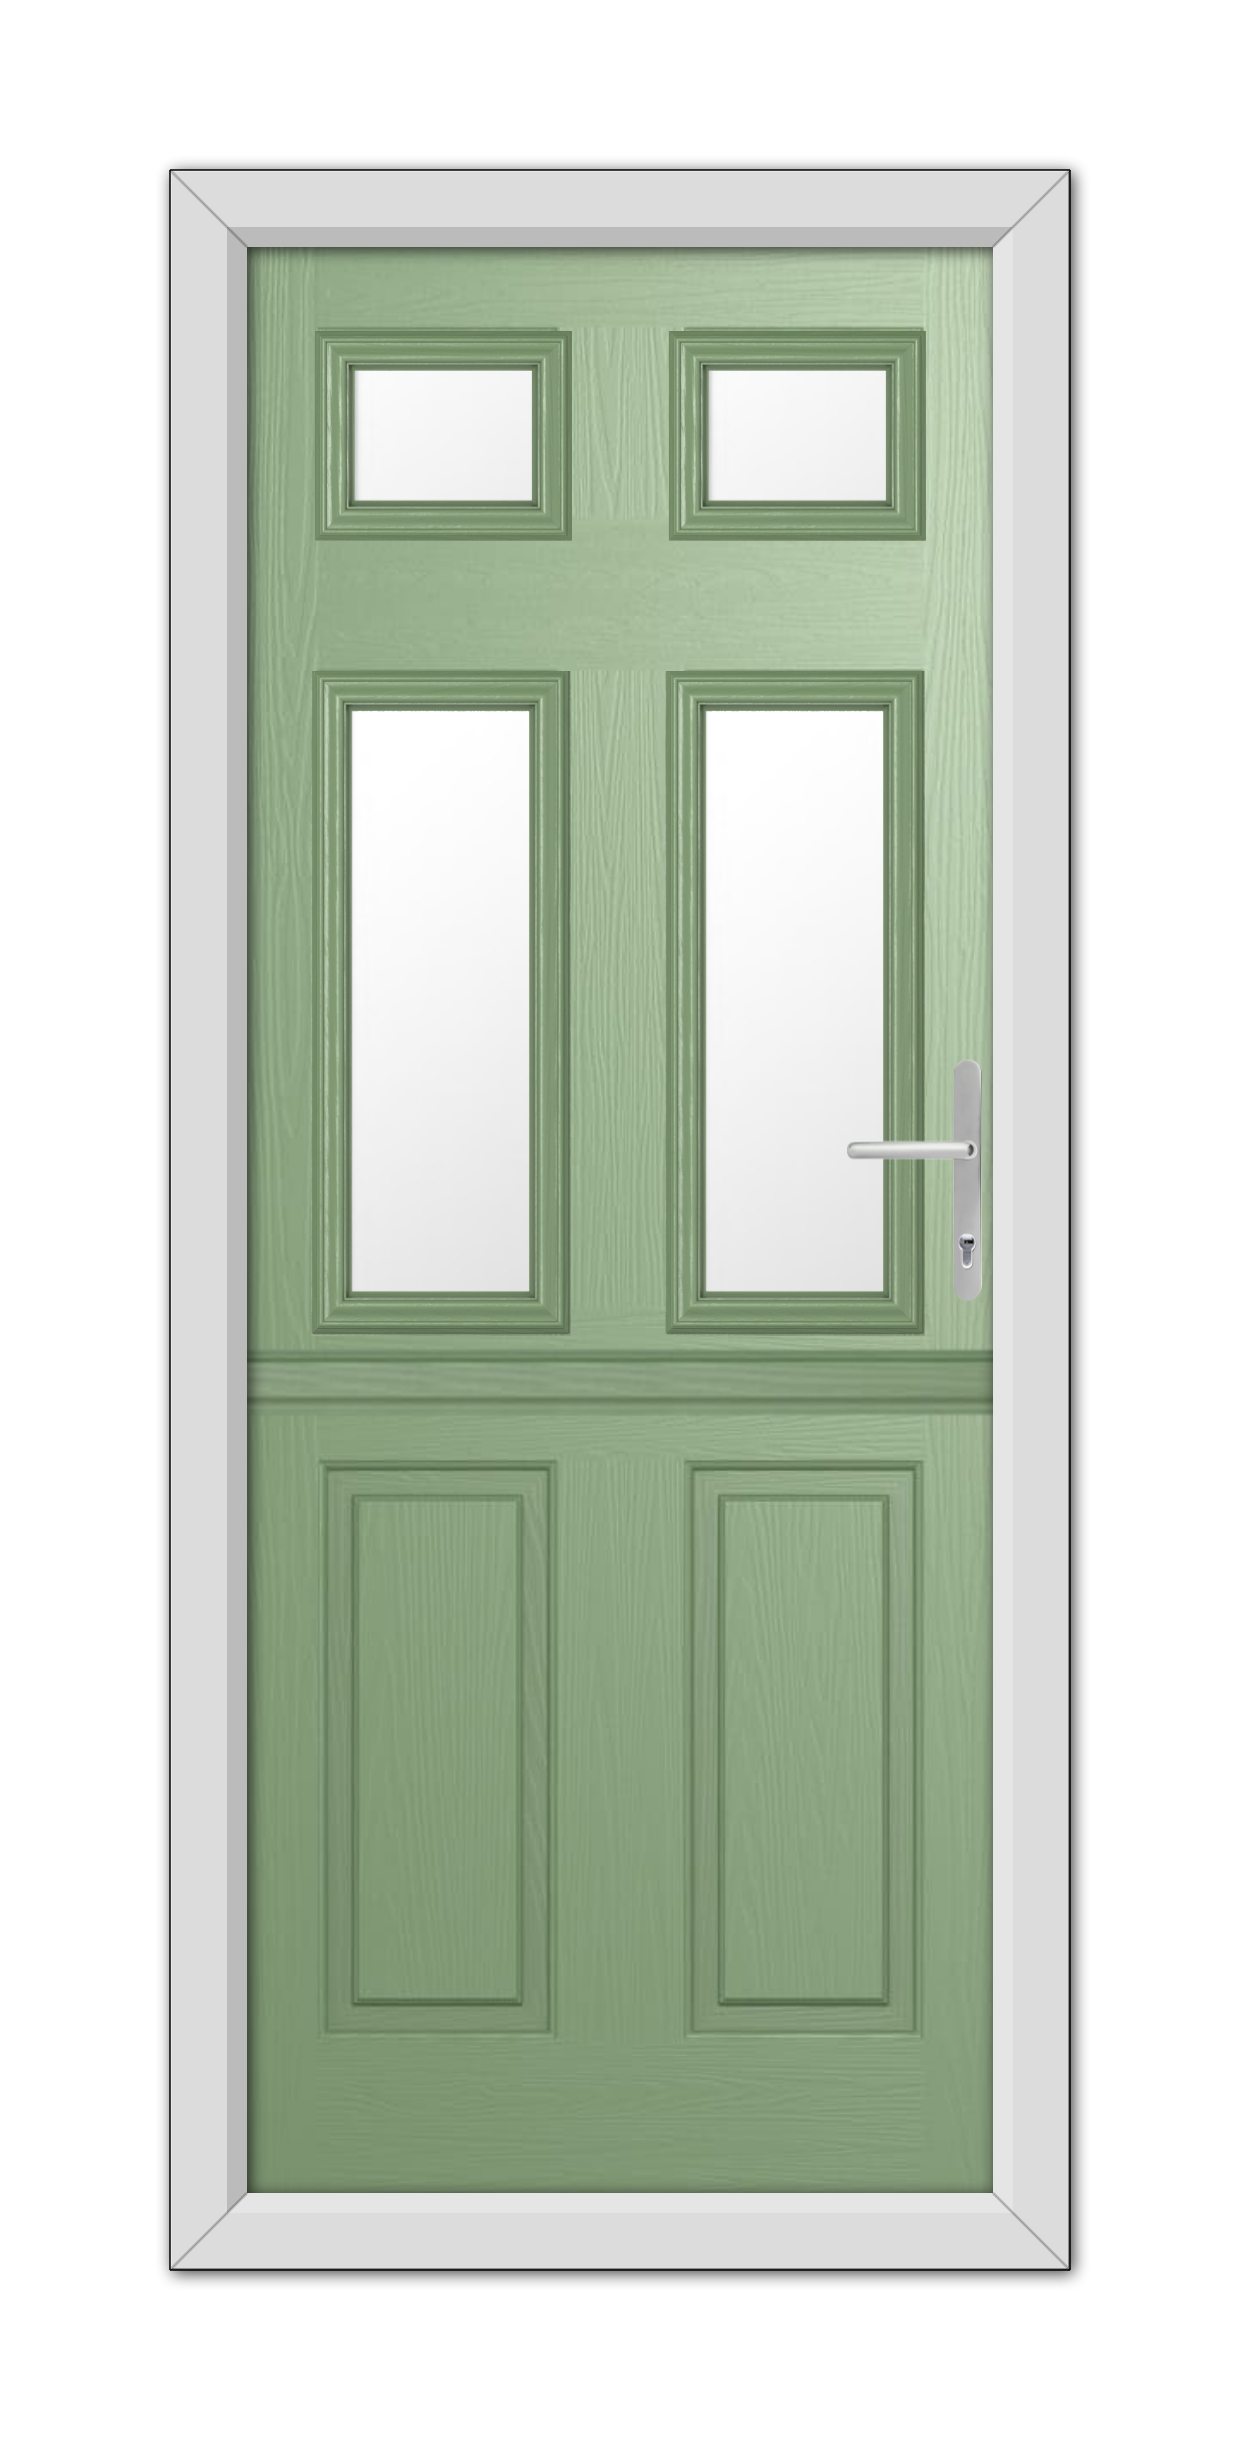 A Chartwell Green Middleton Glazed 4 Stable Composite Door 48mm Timber Core with a metallic handle, set within a white frame.